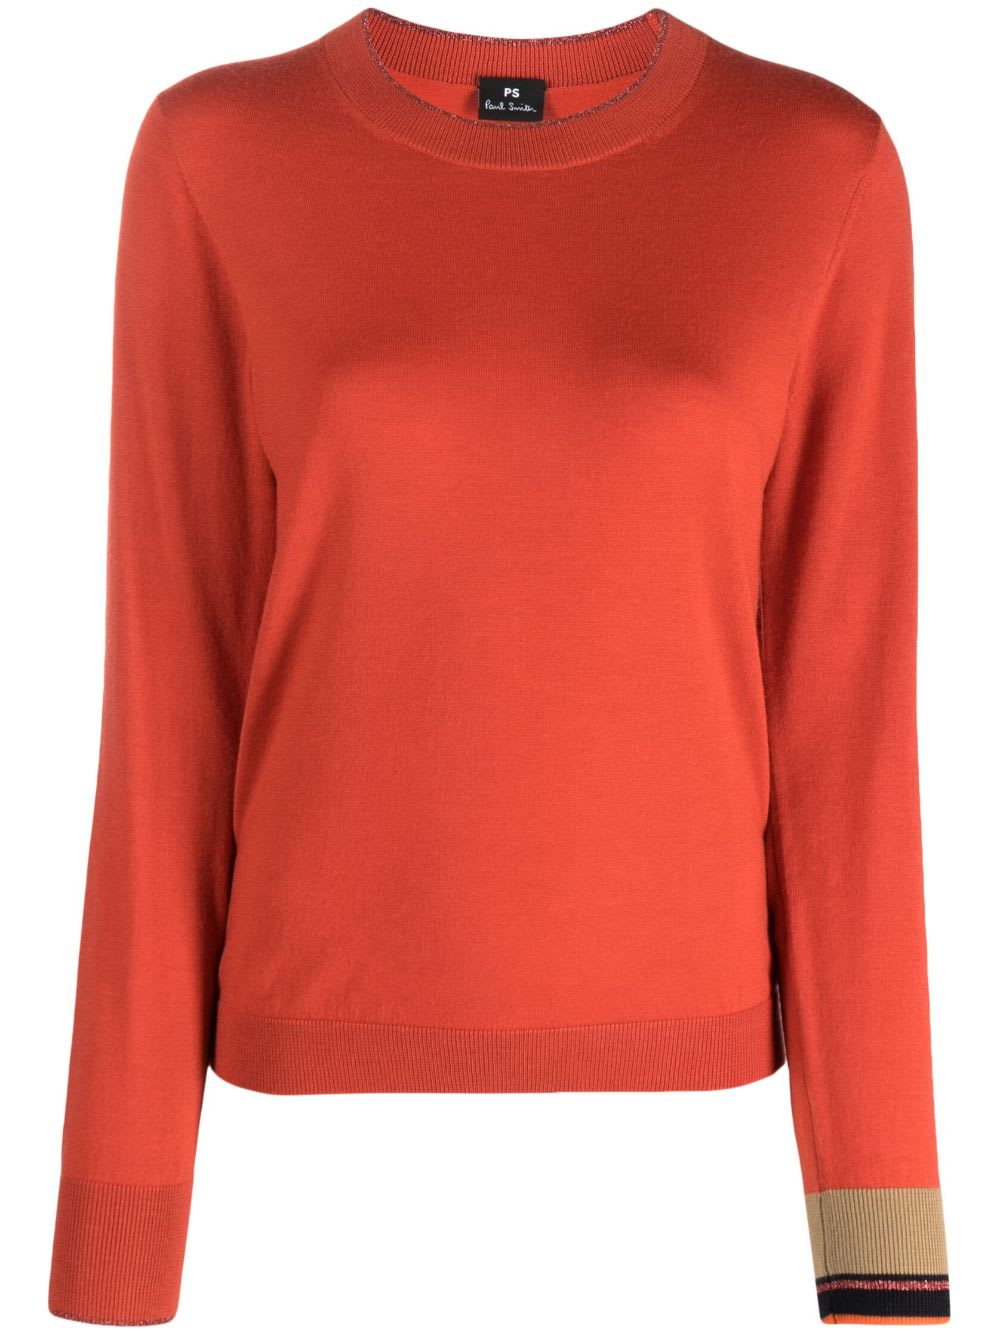 PS BY PAUL SMITH CREW NECK SWEATER